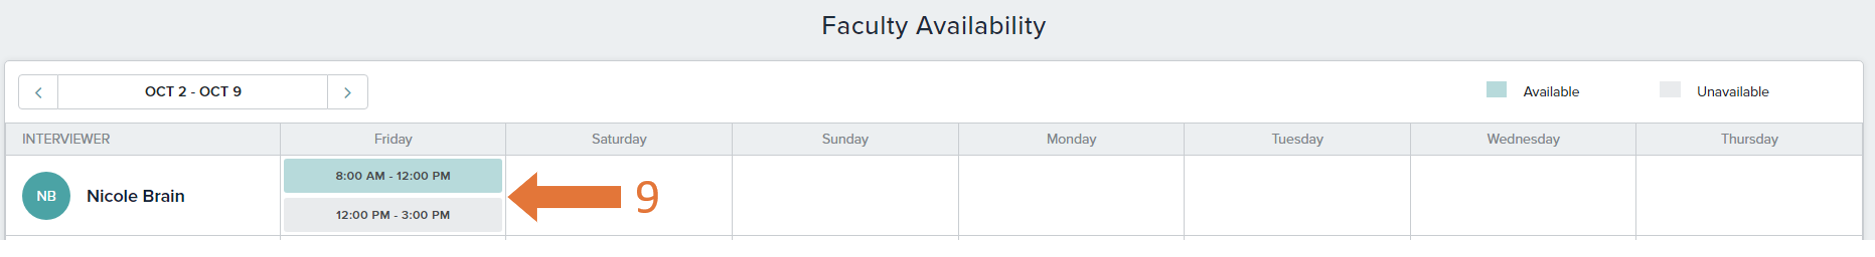 Faculty_Availability_5.png